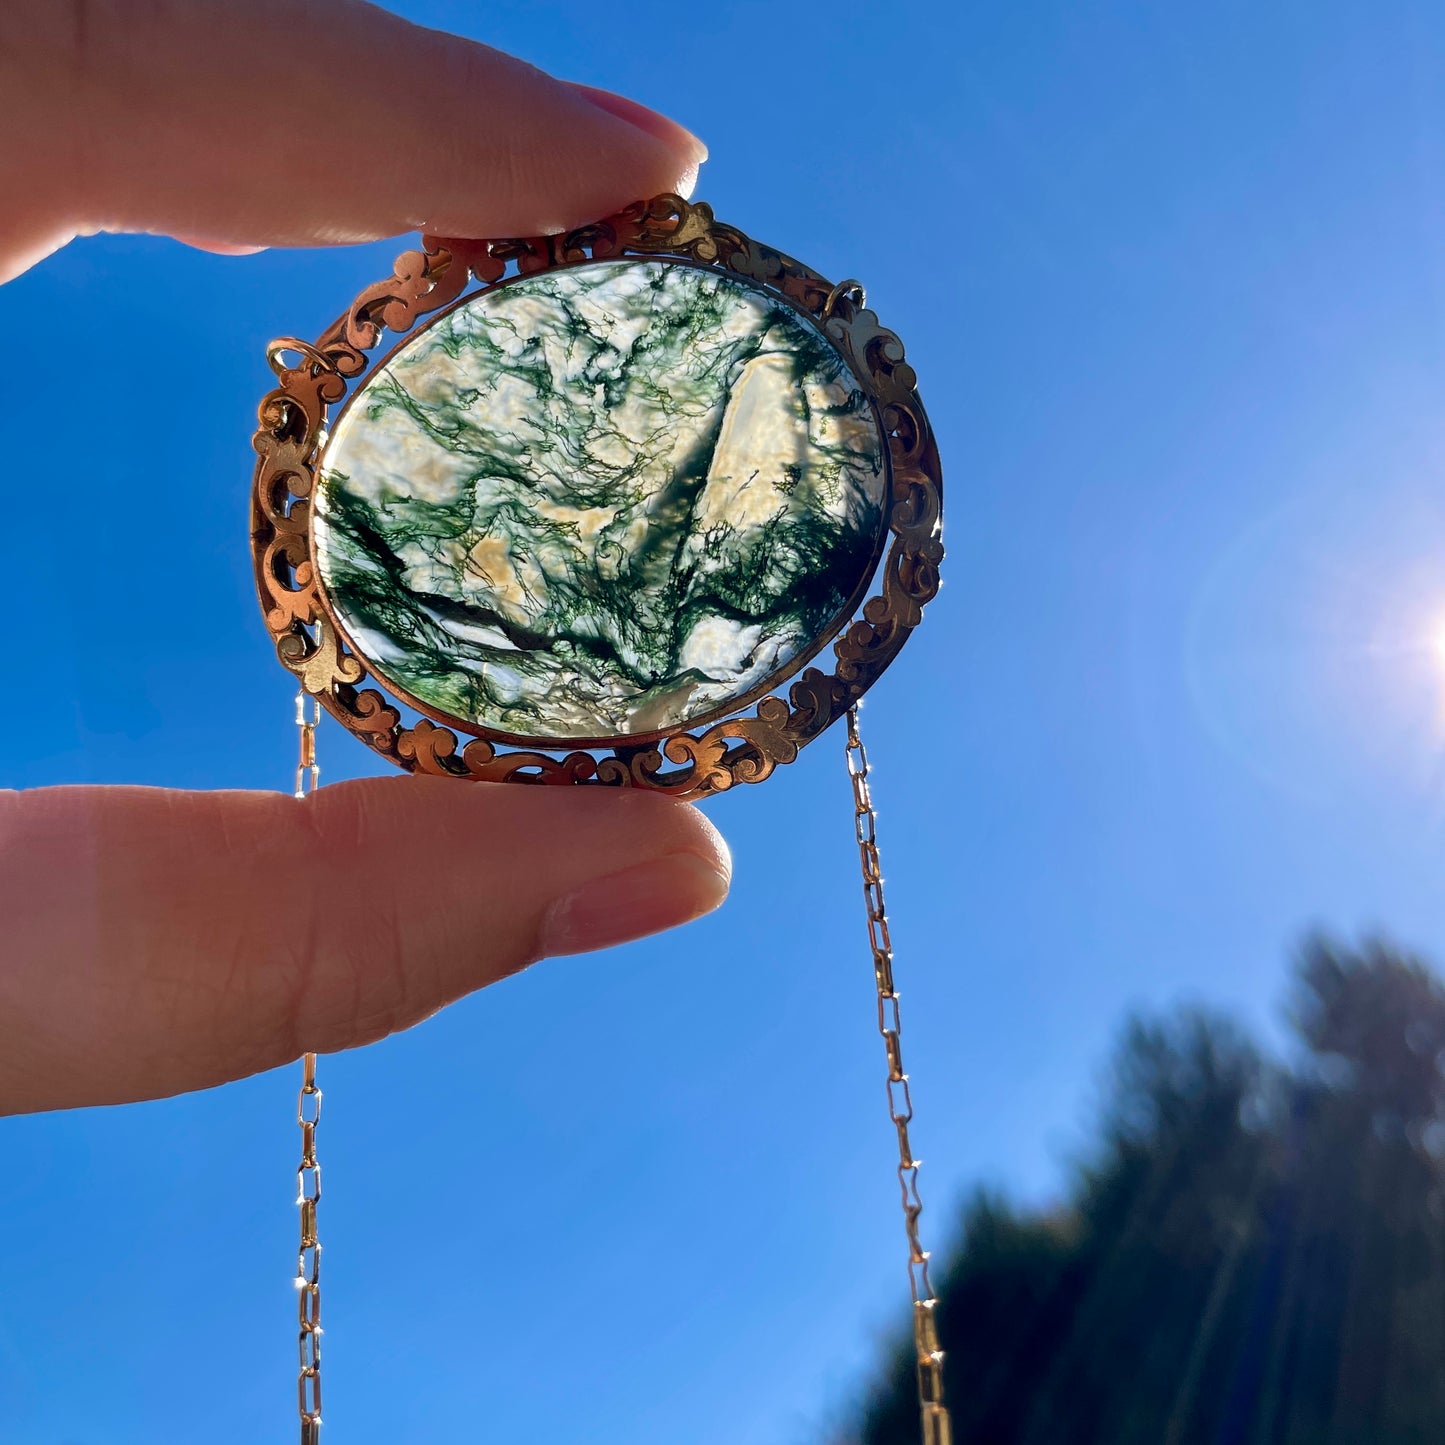 Antique Victorian Crystal Quartz Moss Green Agate Necklace held up to the blue sky and sunlight passing through the stone